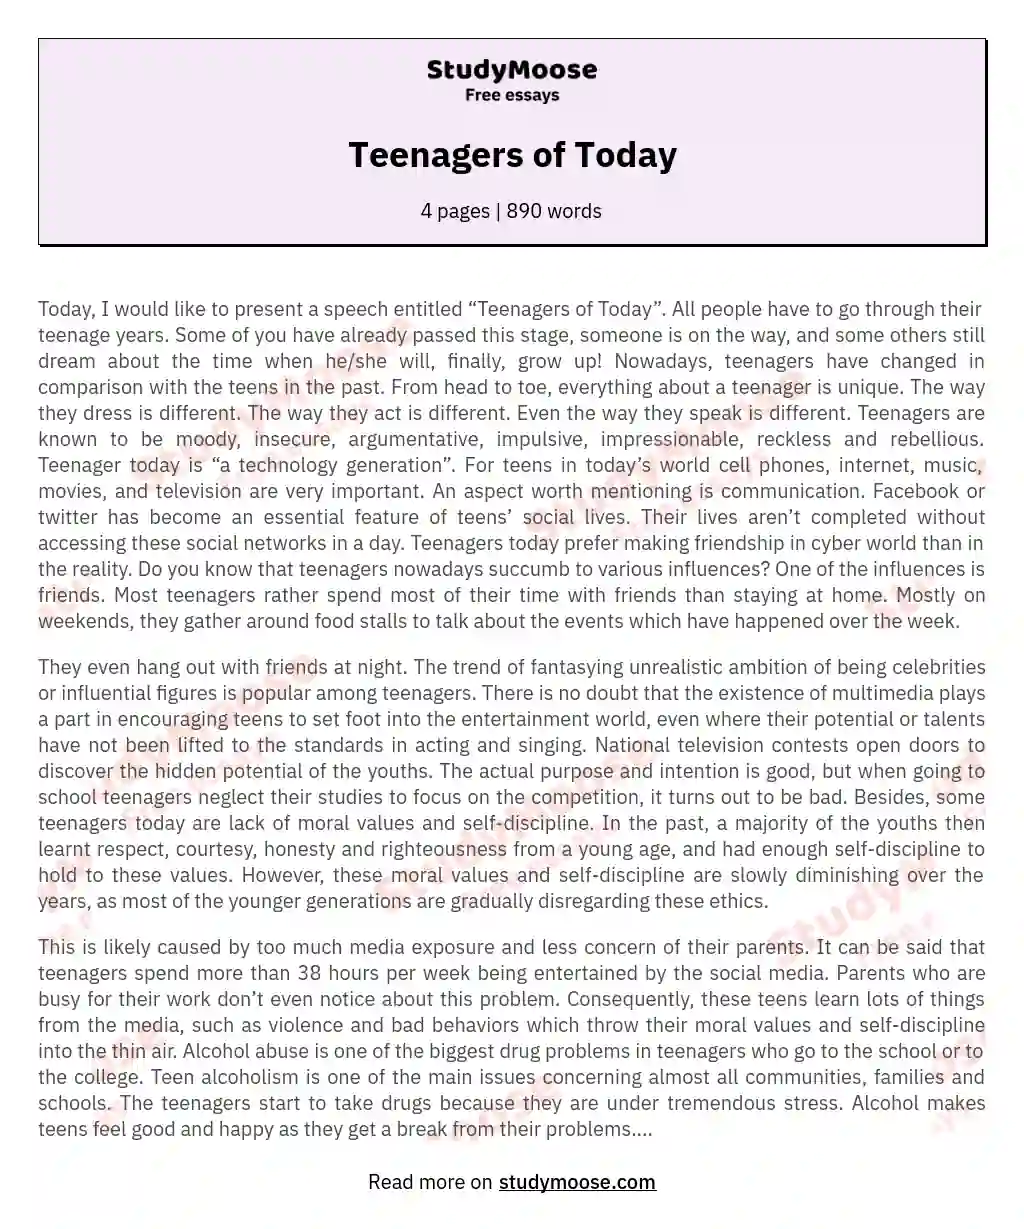 Teenagers of Today essay